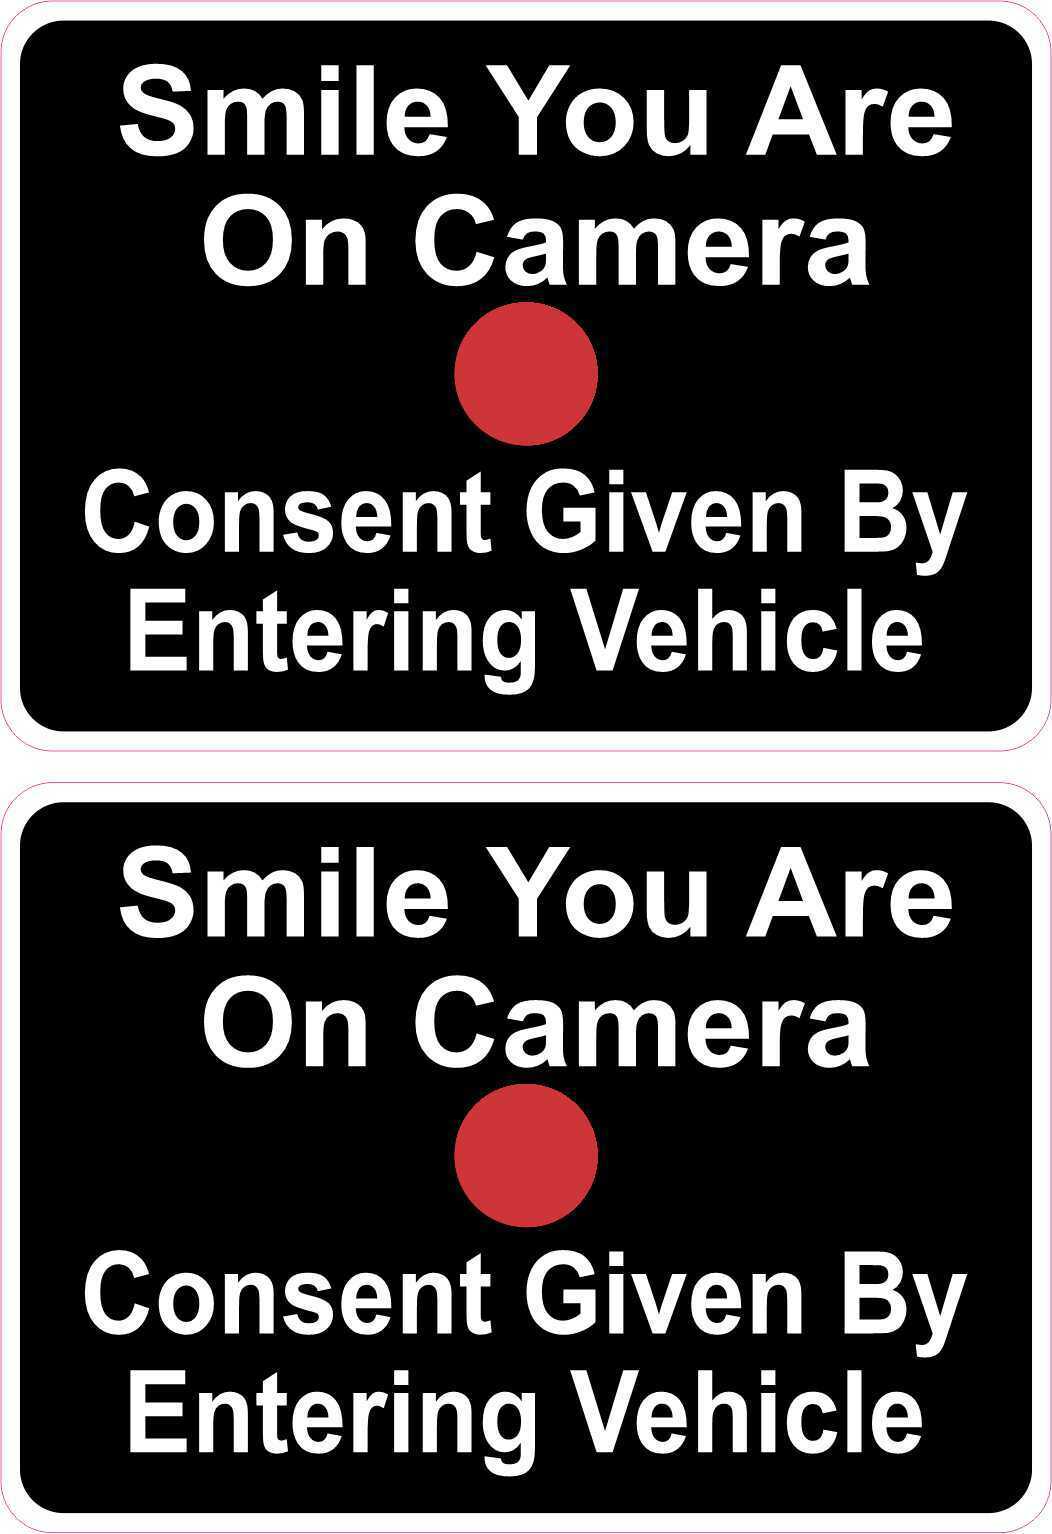 3.5in x 2.5in Smile You Are on Camera Vinyl Stickers Car Vehicle Bumper Decal